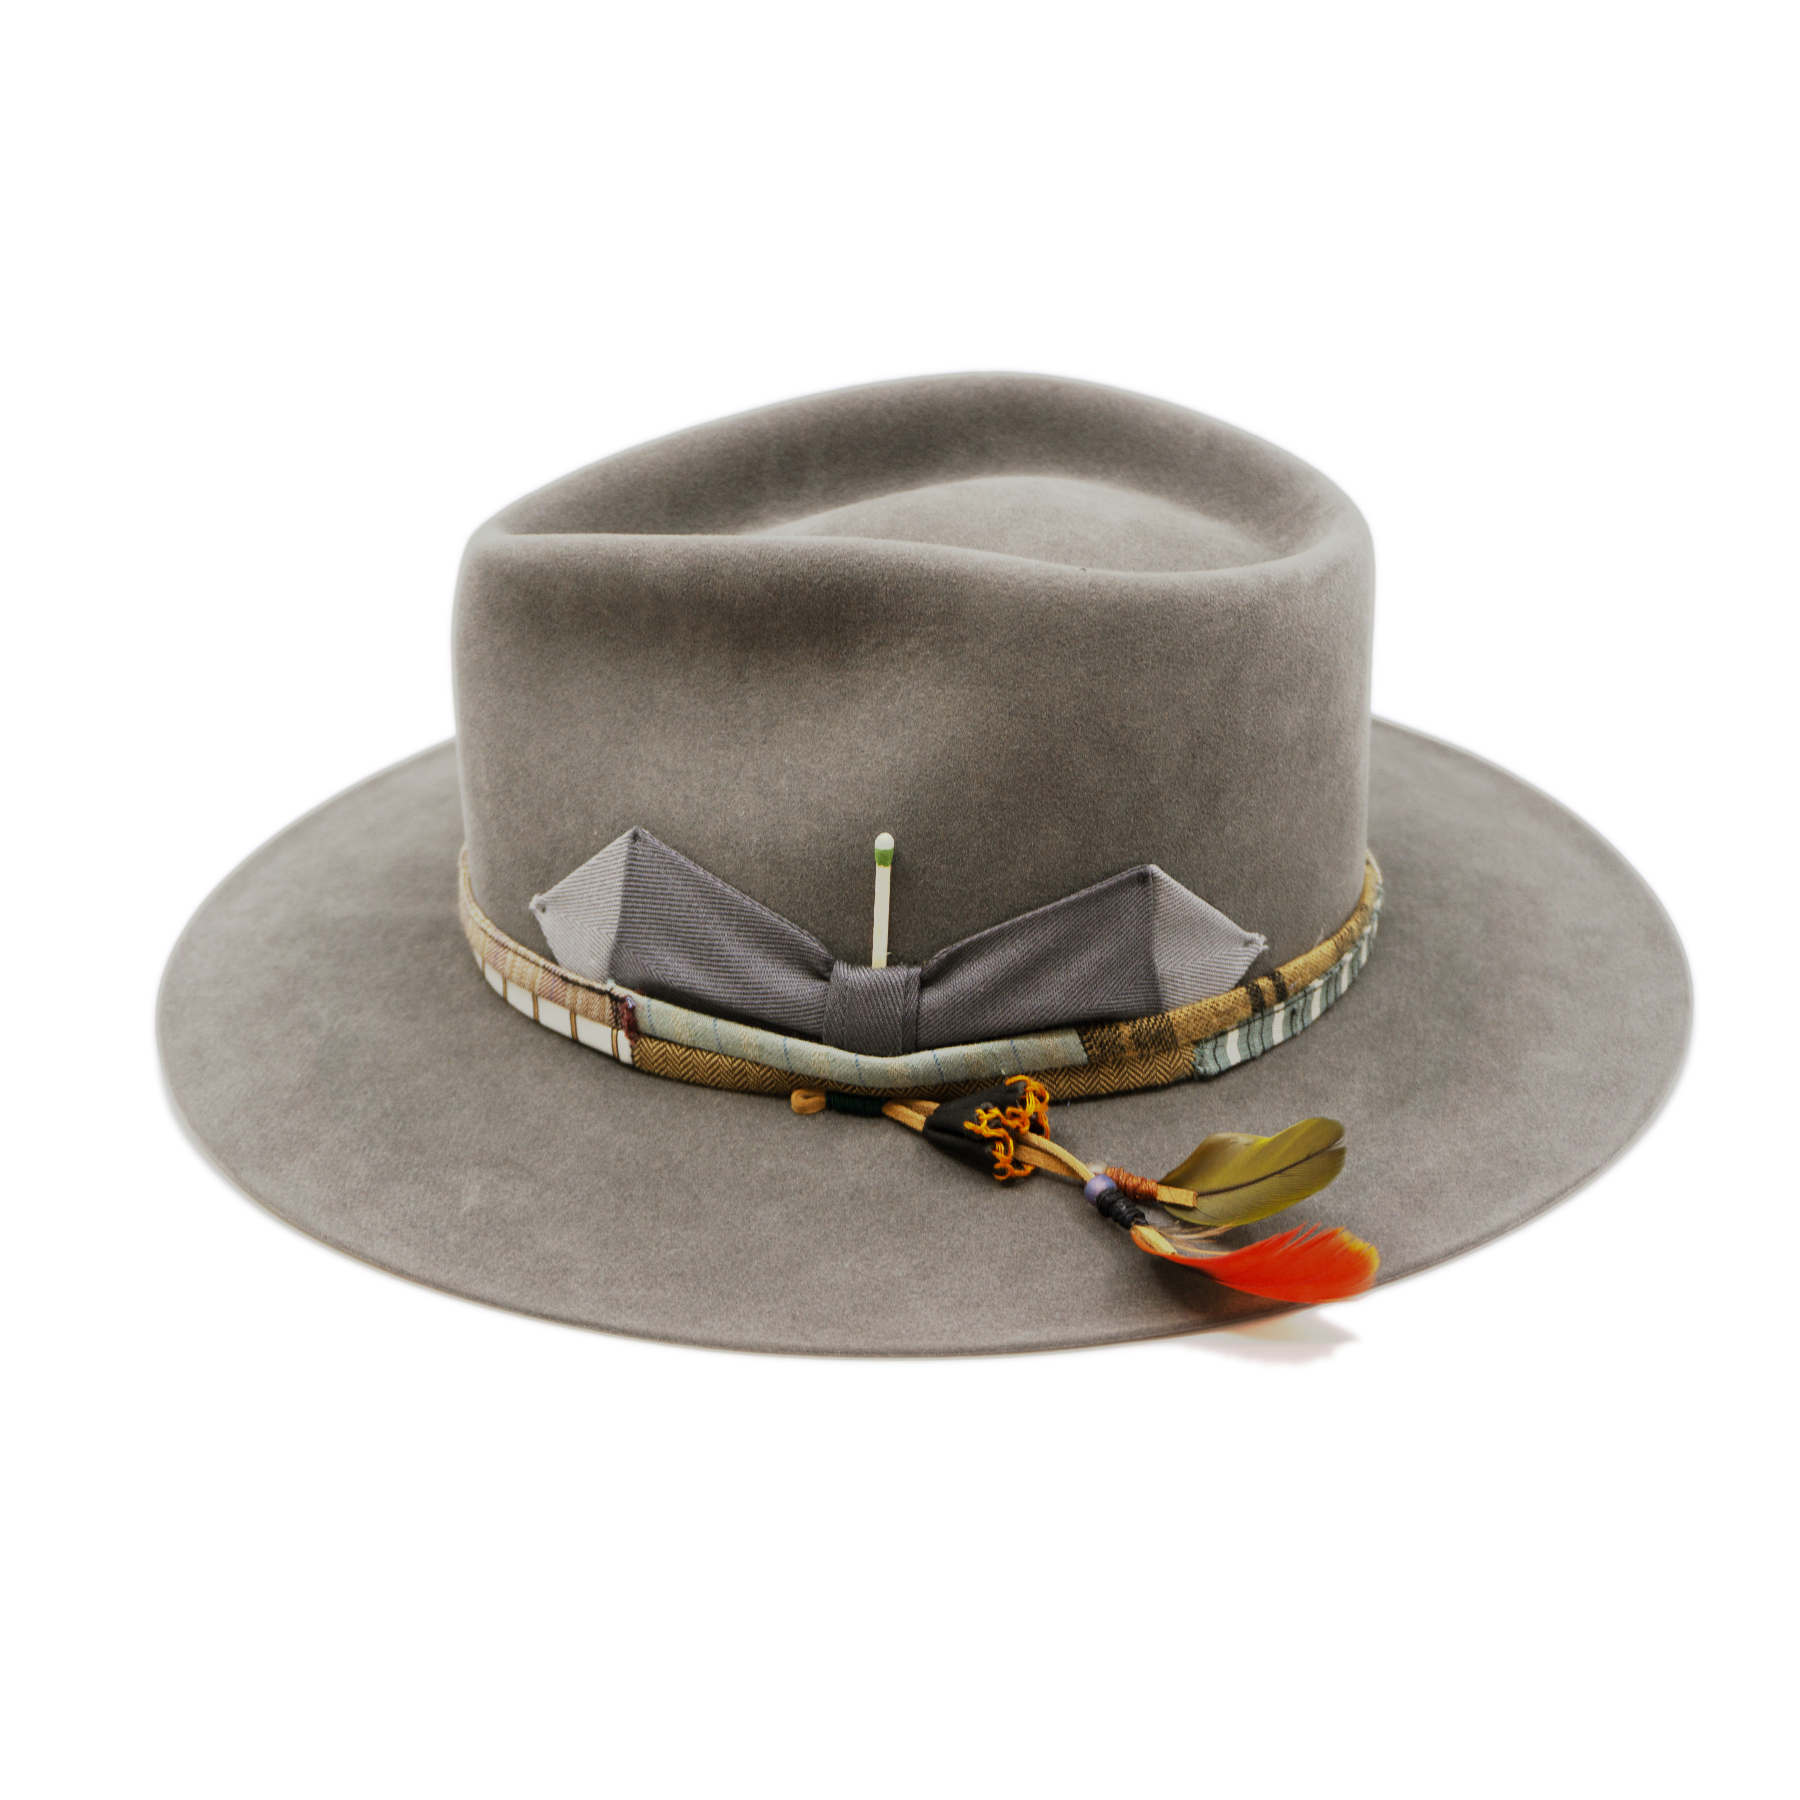 100% felt hat in Slate Grey  Western  Weight   ½” NF multi fabric band and cord   Double tonal grey grosgrain bow  Leather patches and molt harvested parrot feather   Flat brim  Made in USA 